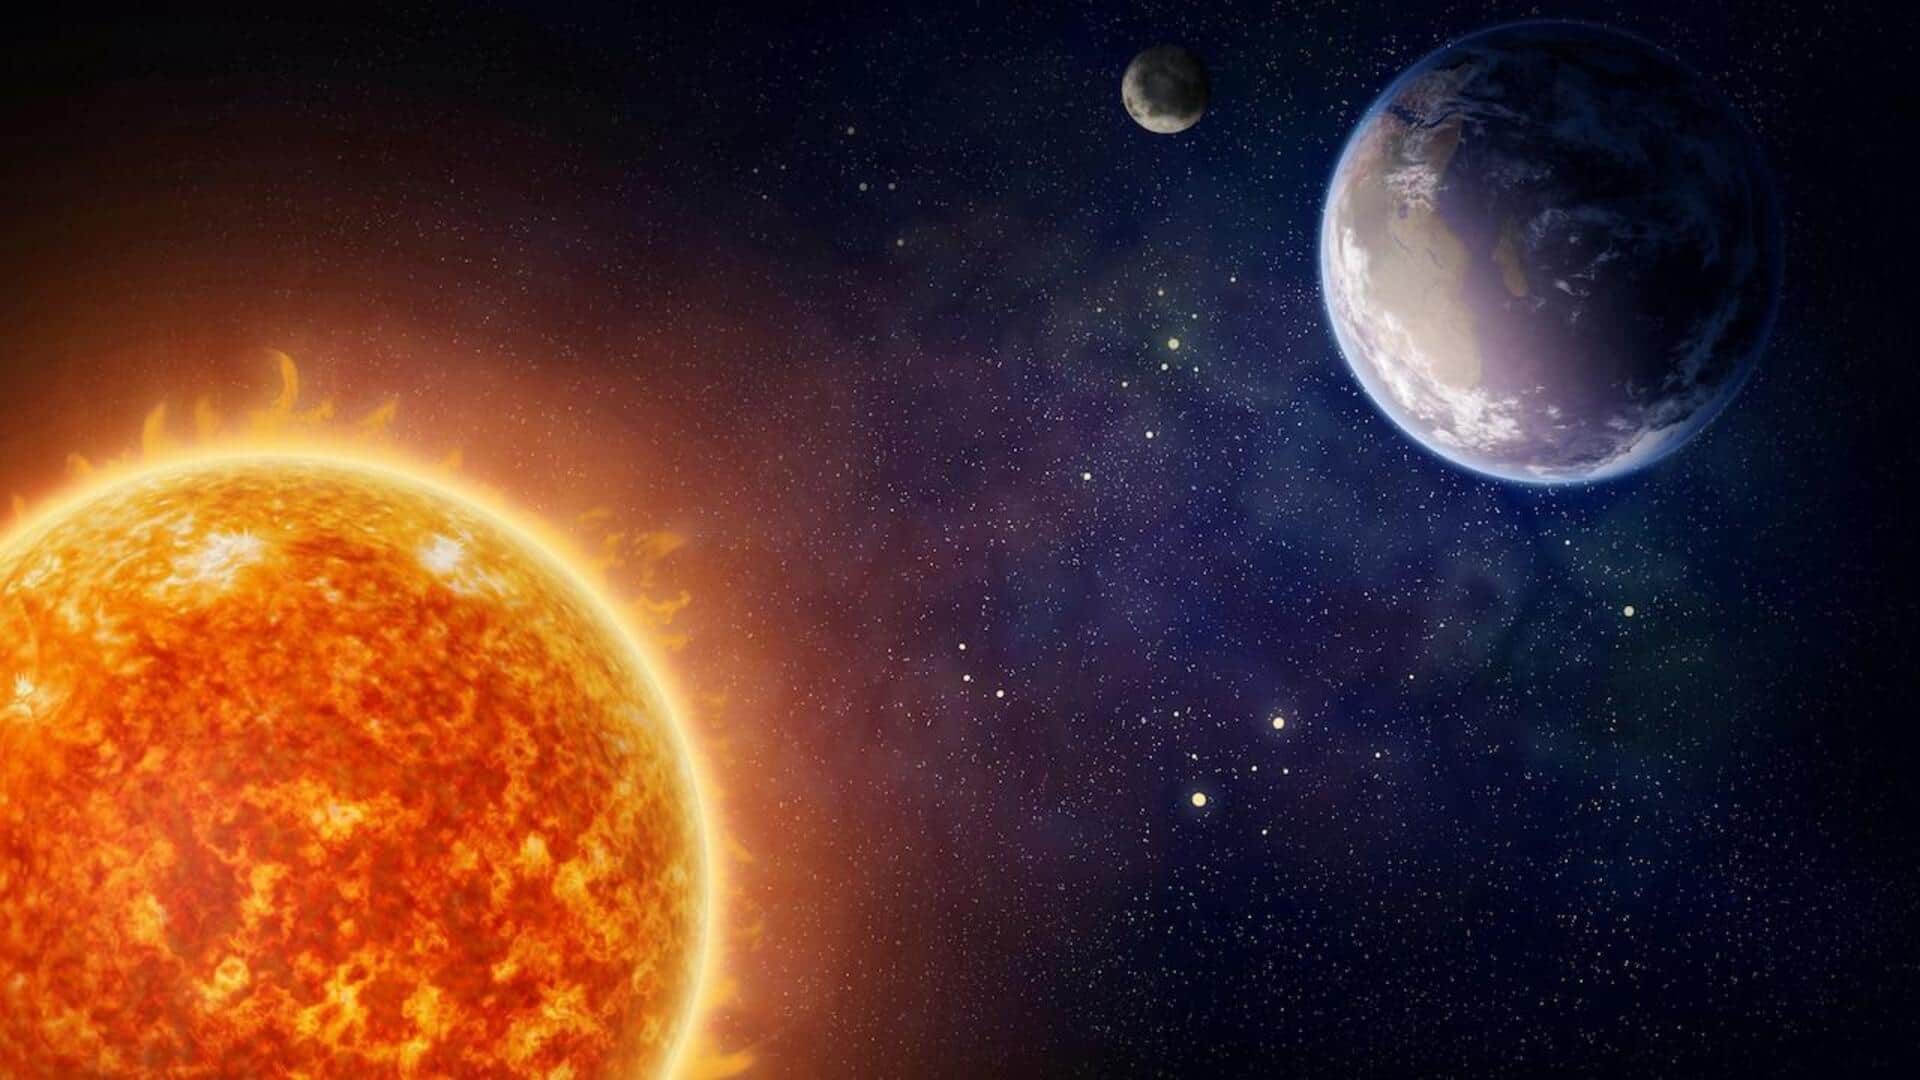 Earth could be swallowed up by Sun, warns new study